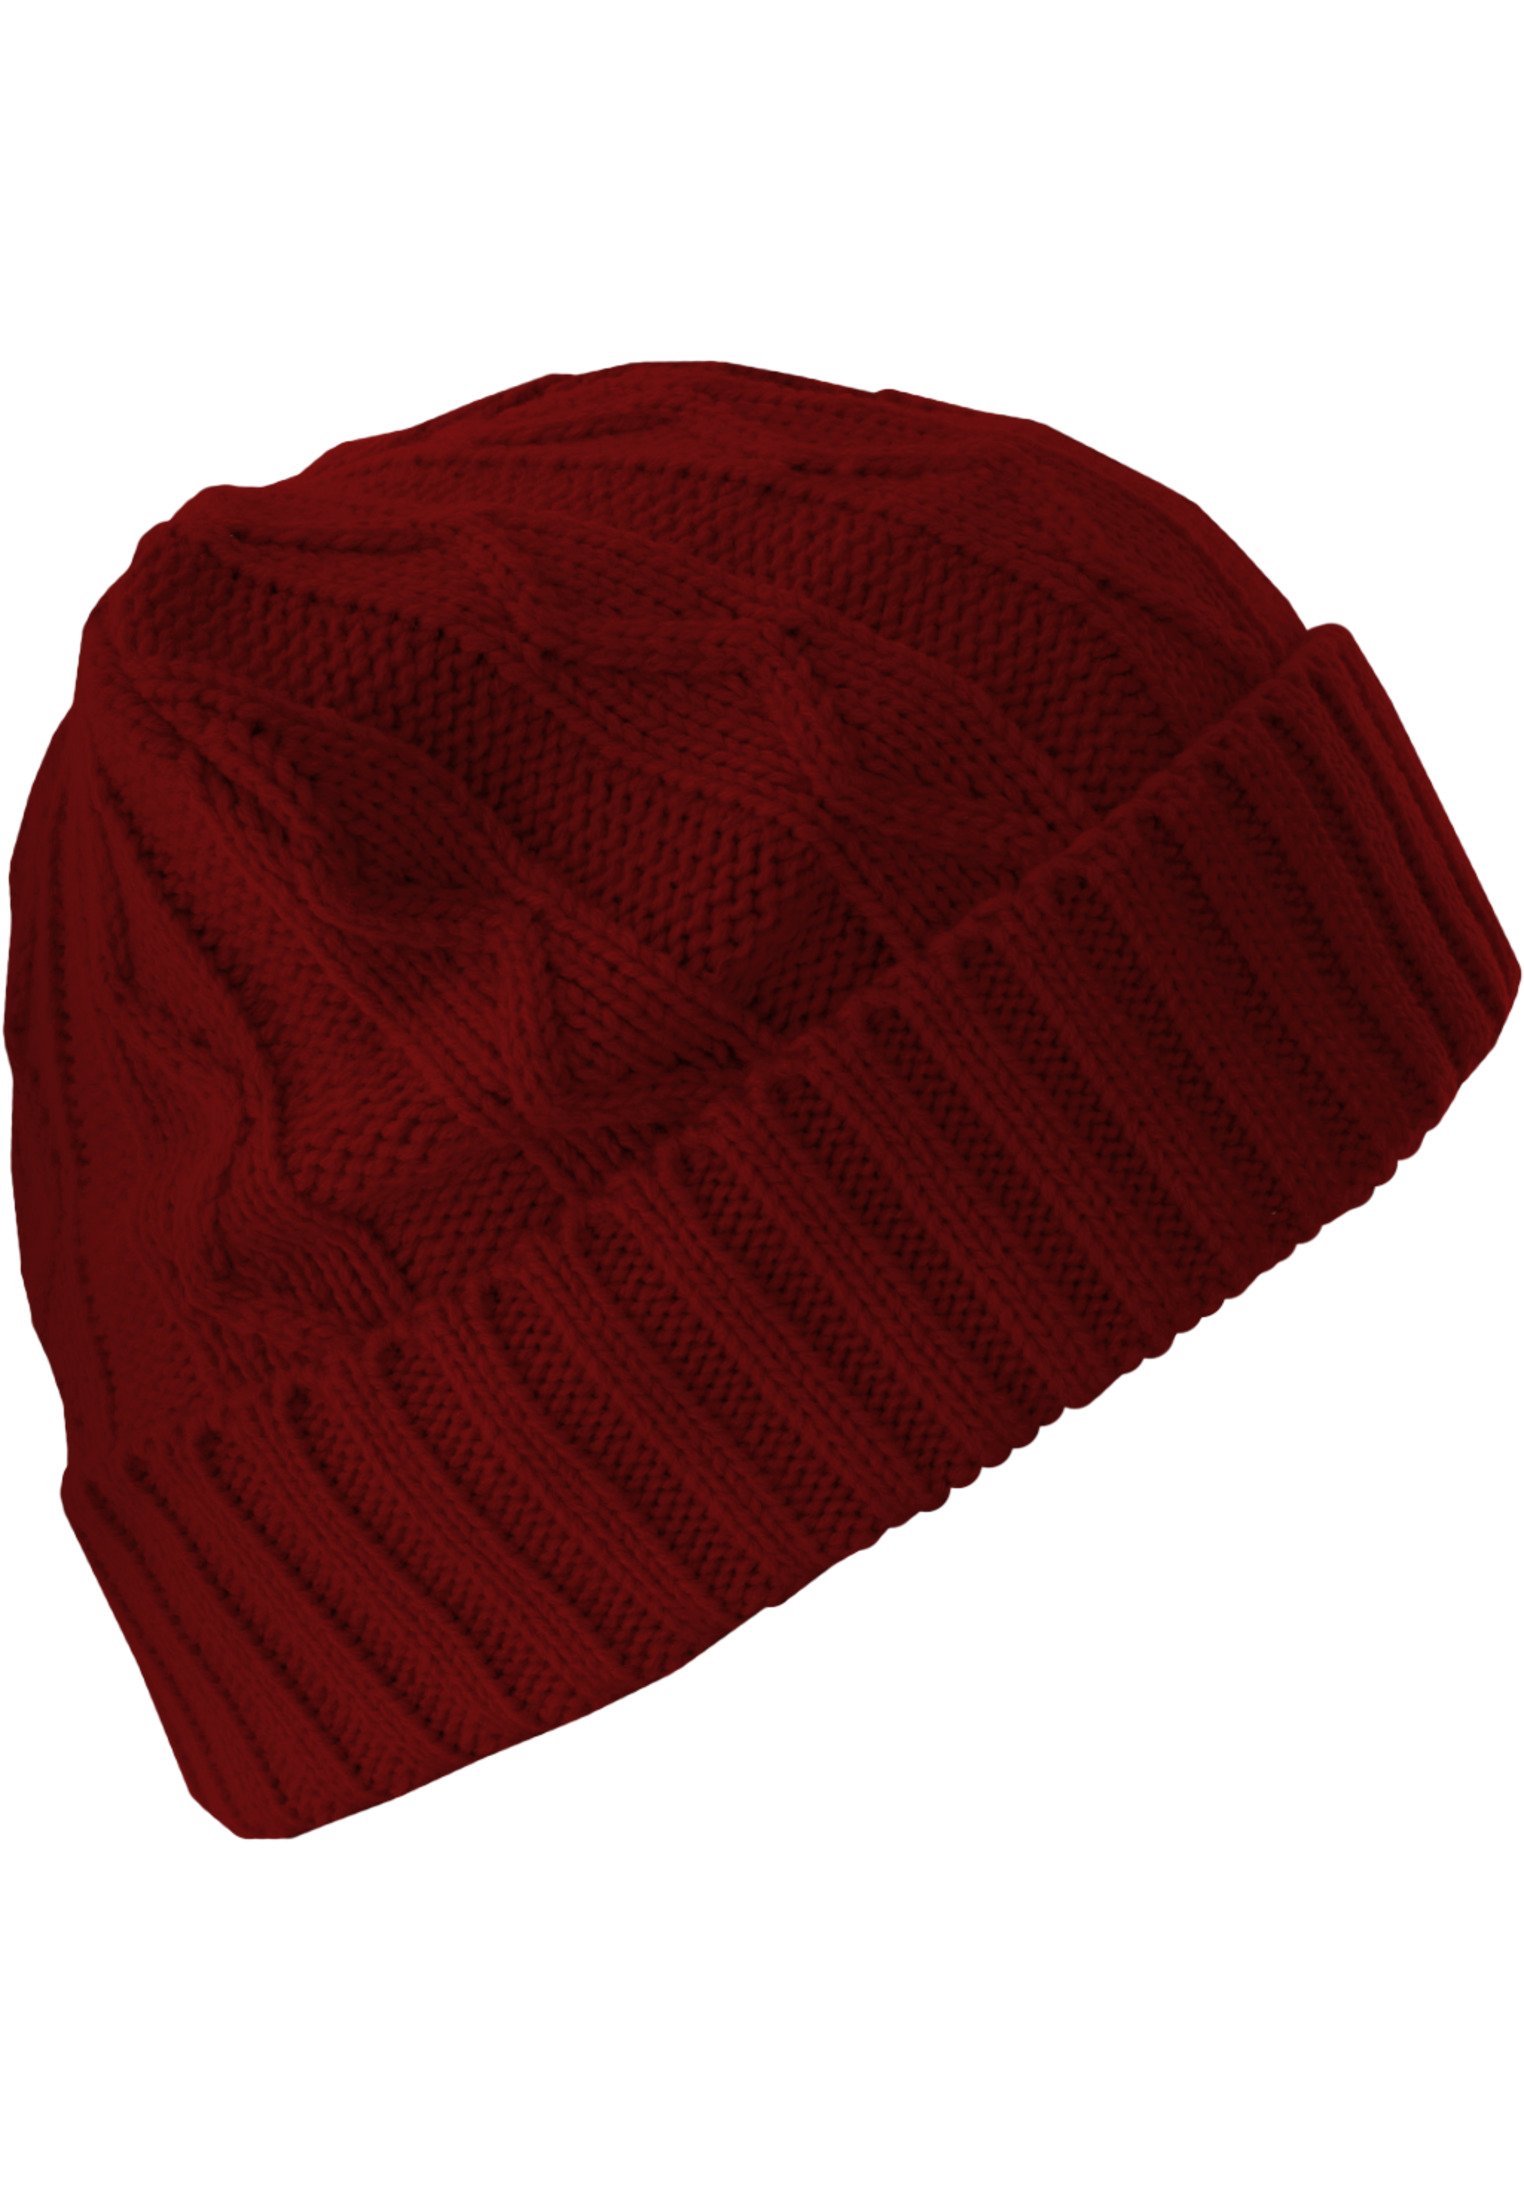 Beanie Cable Flap maroon one size